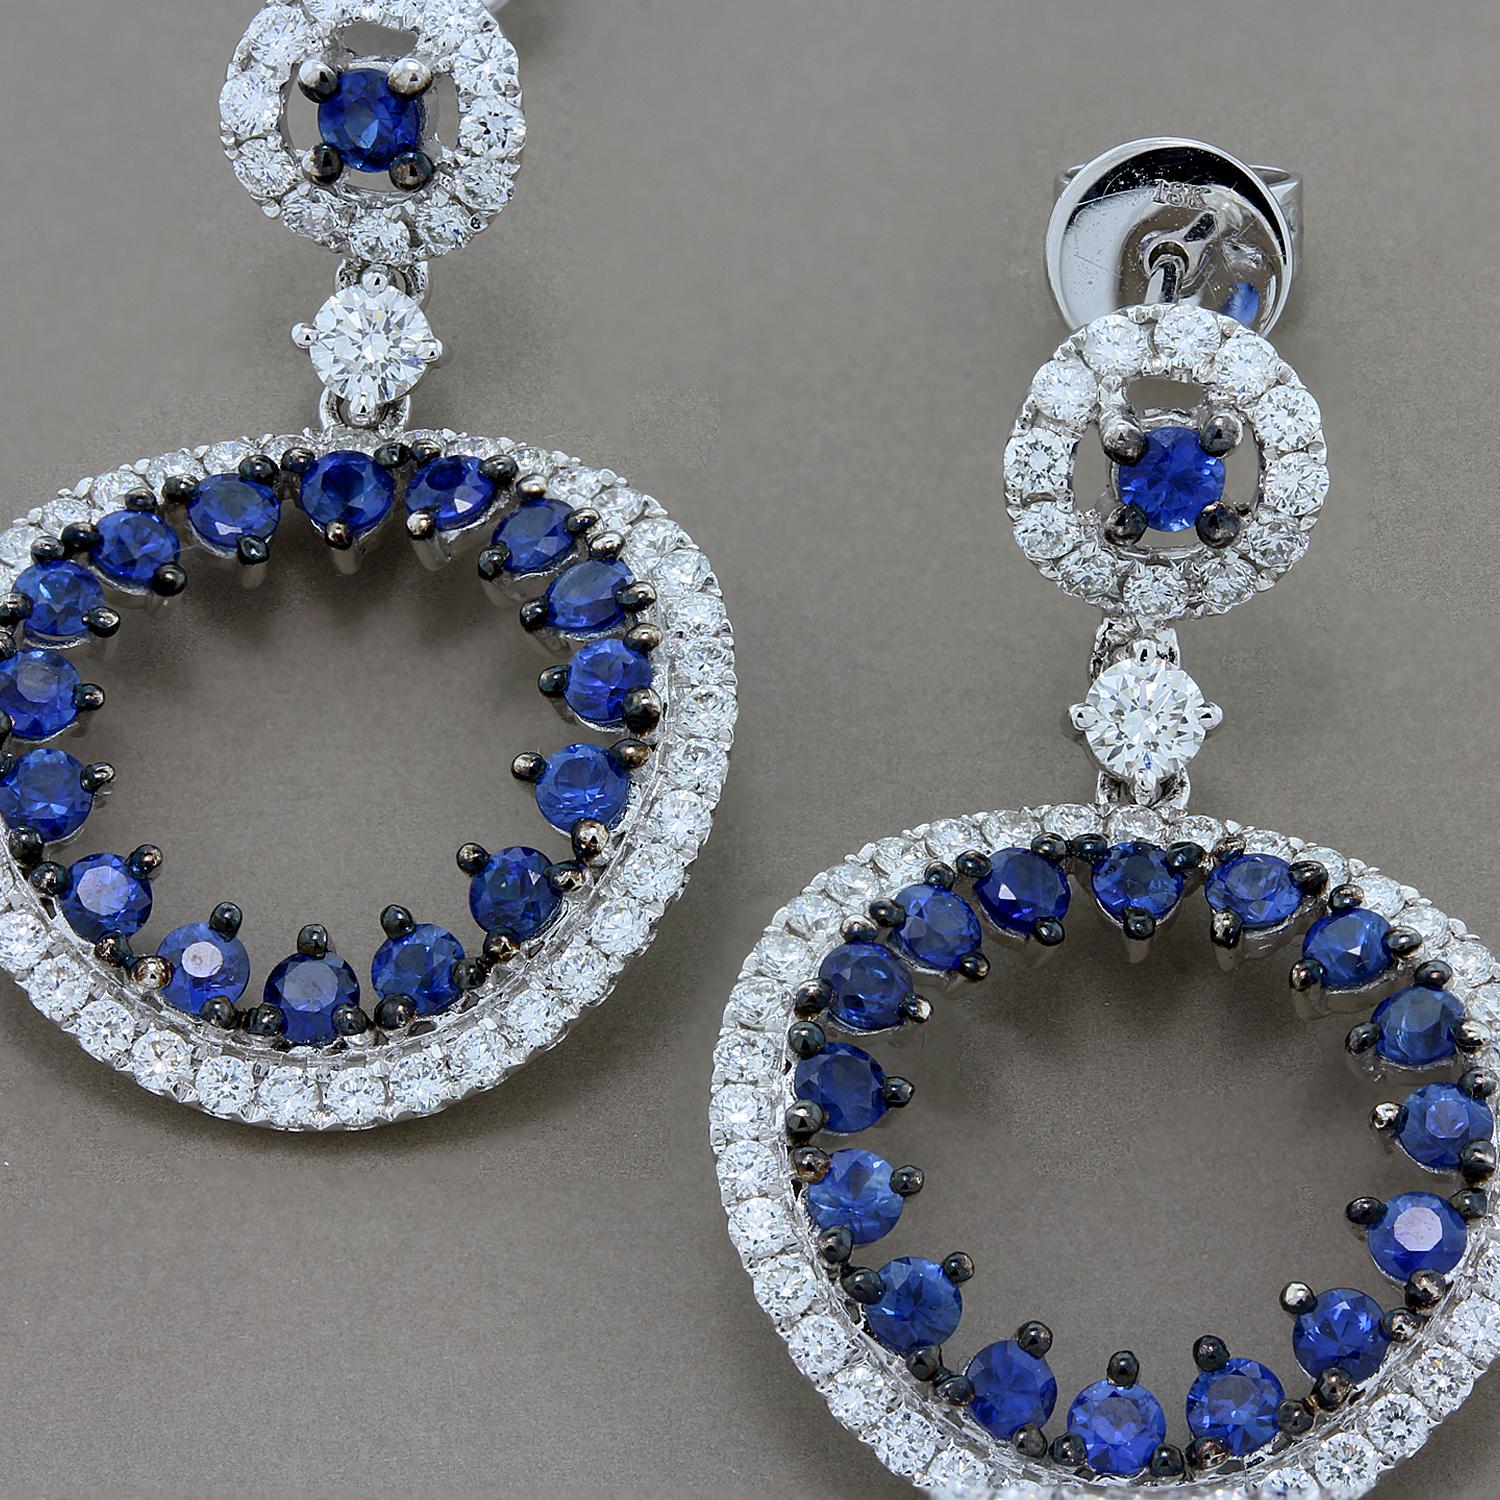 1.94 carats of fine blue round cut sapphires set within a 1.39 carat halo of round cut white diamonds. A unique pair set in 18K white gold with accents of black rhodium.

Earring Length: 1.75 inches
Earring Width: 0.75 inch
